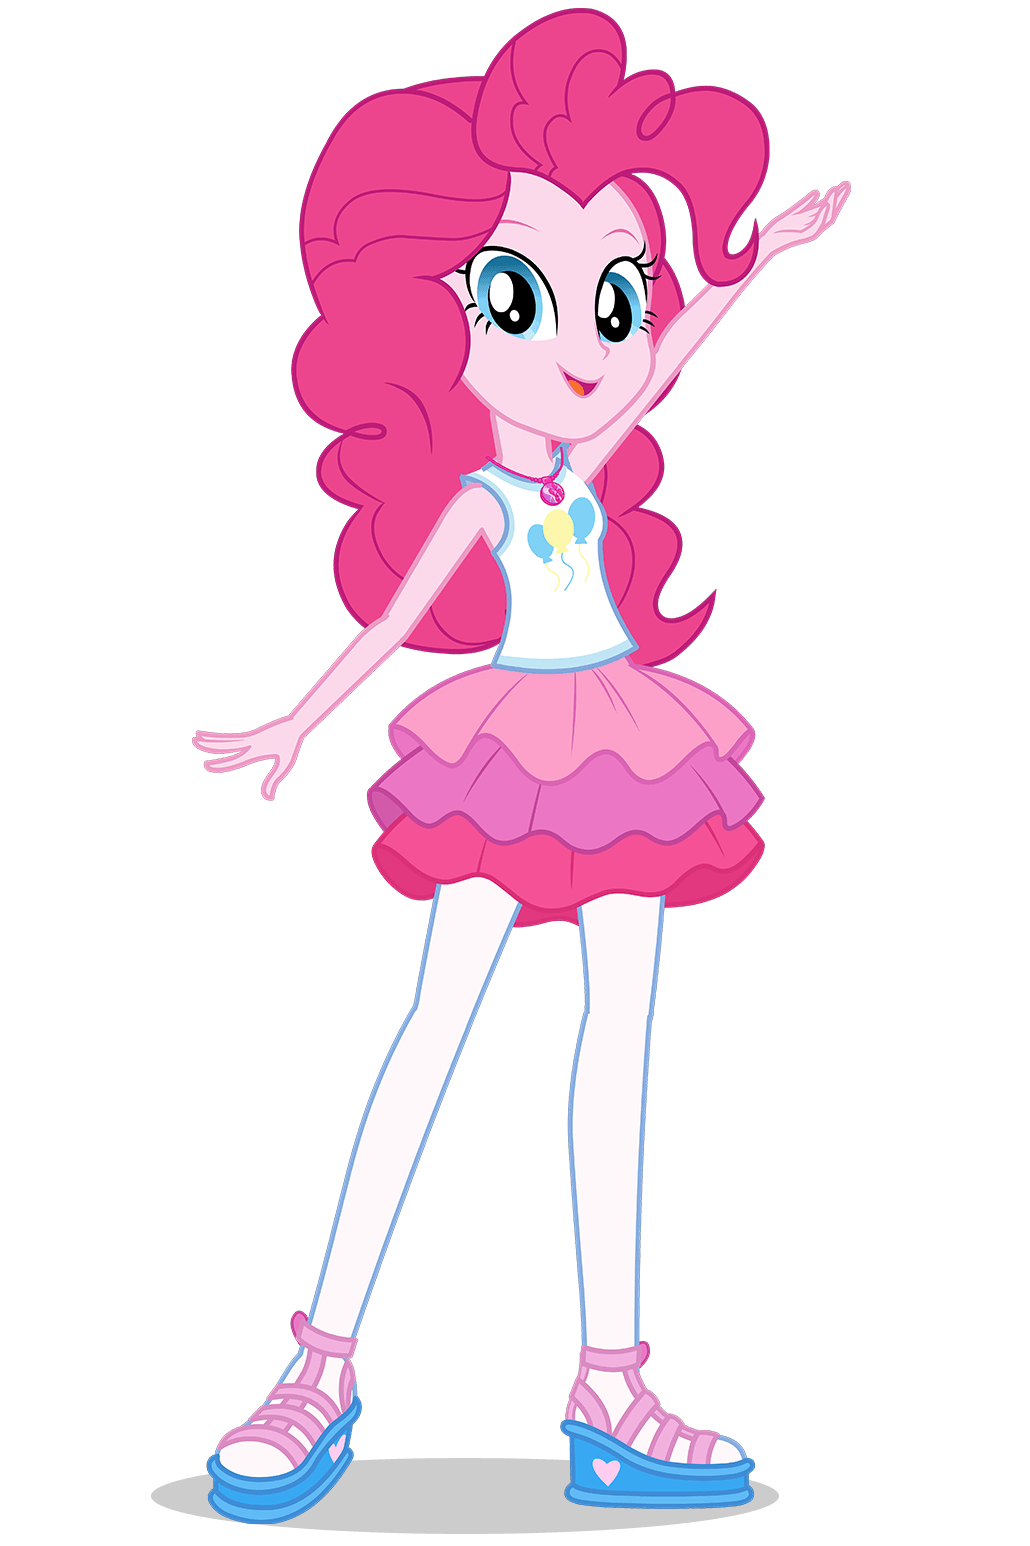 https://static.wikia.nocookie.net/equestriagirls/images/0/00/Equestria_Girls_Digital_Series_Pinkie_Pie_official_artwork.png/revision/latest?cb=20230401070050